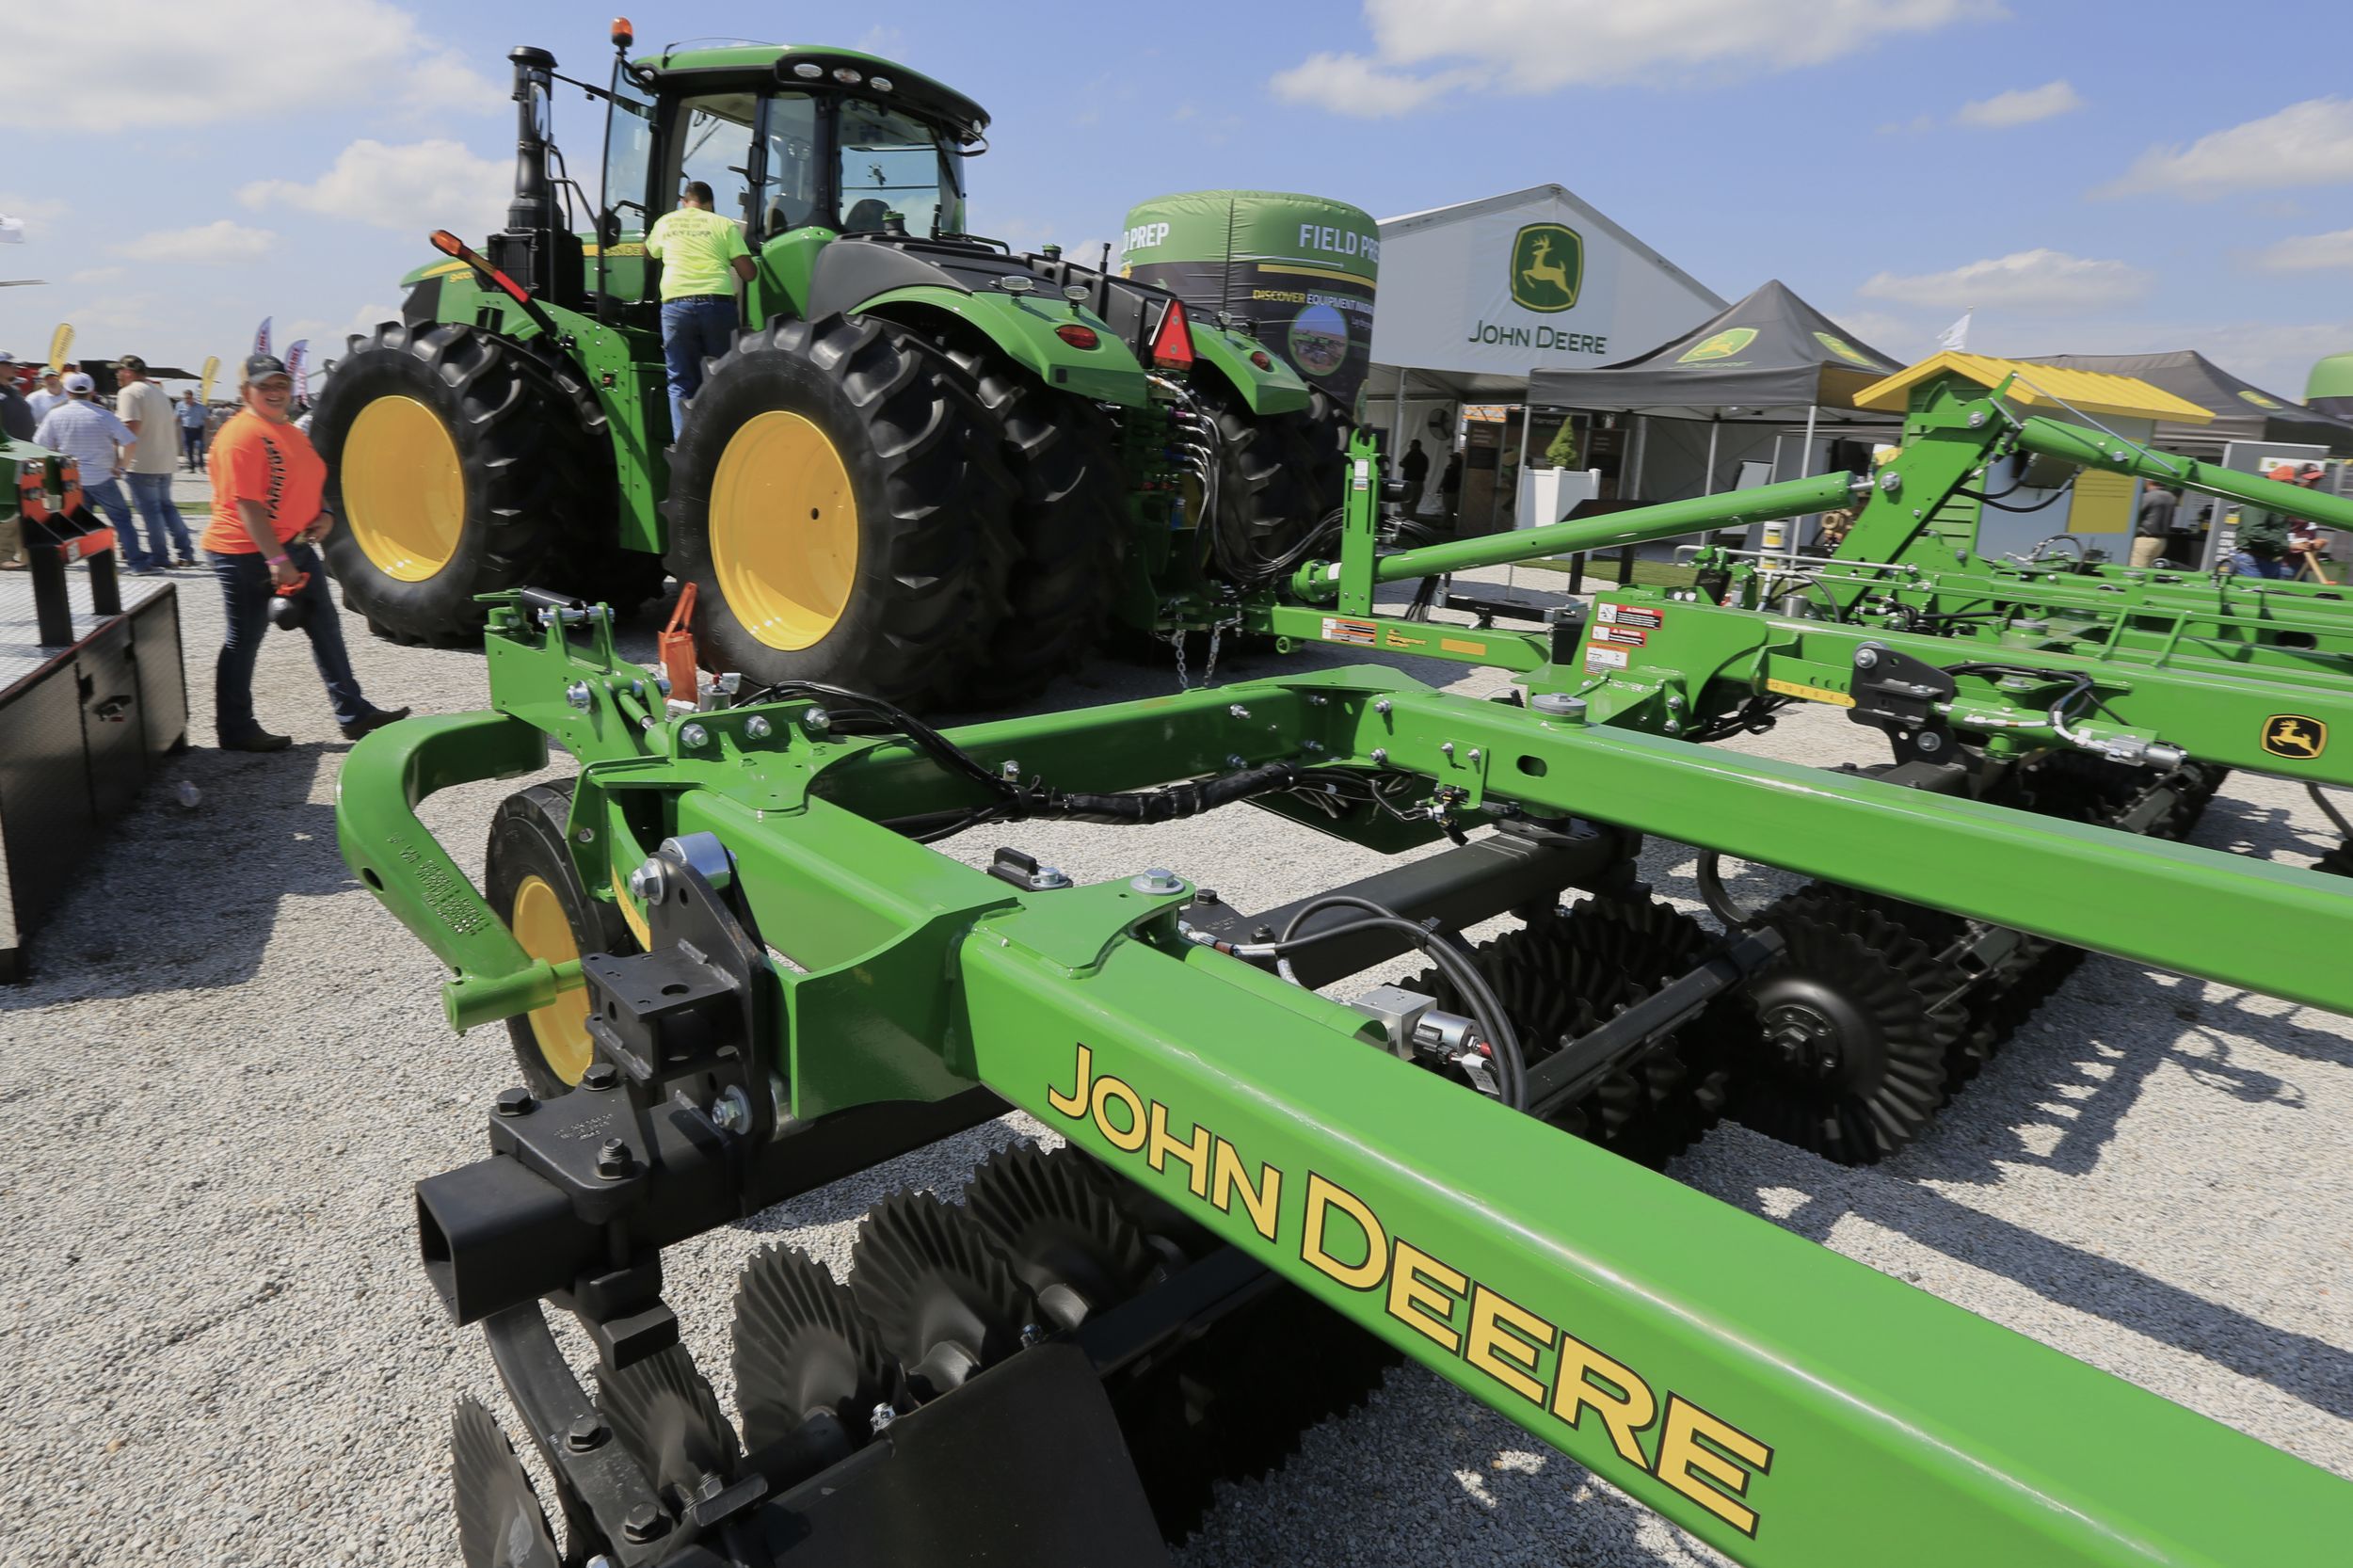 Deere stock surges on hope that farmers upgrade equipment The